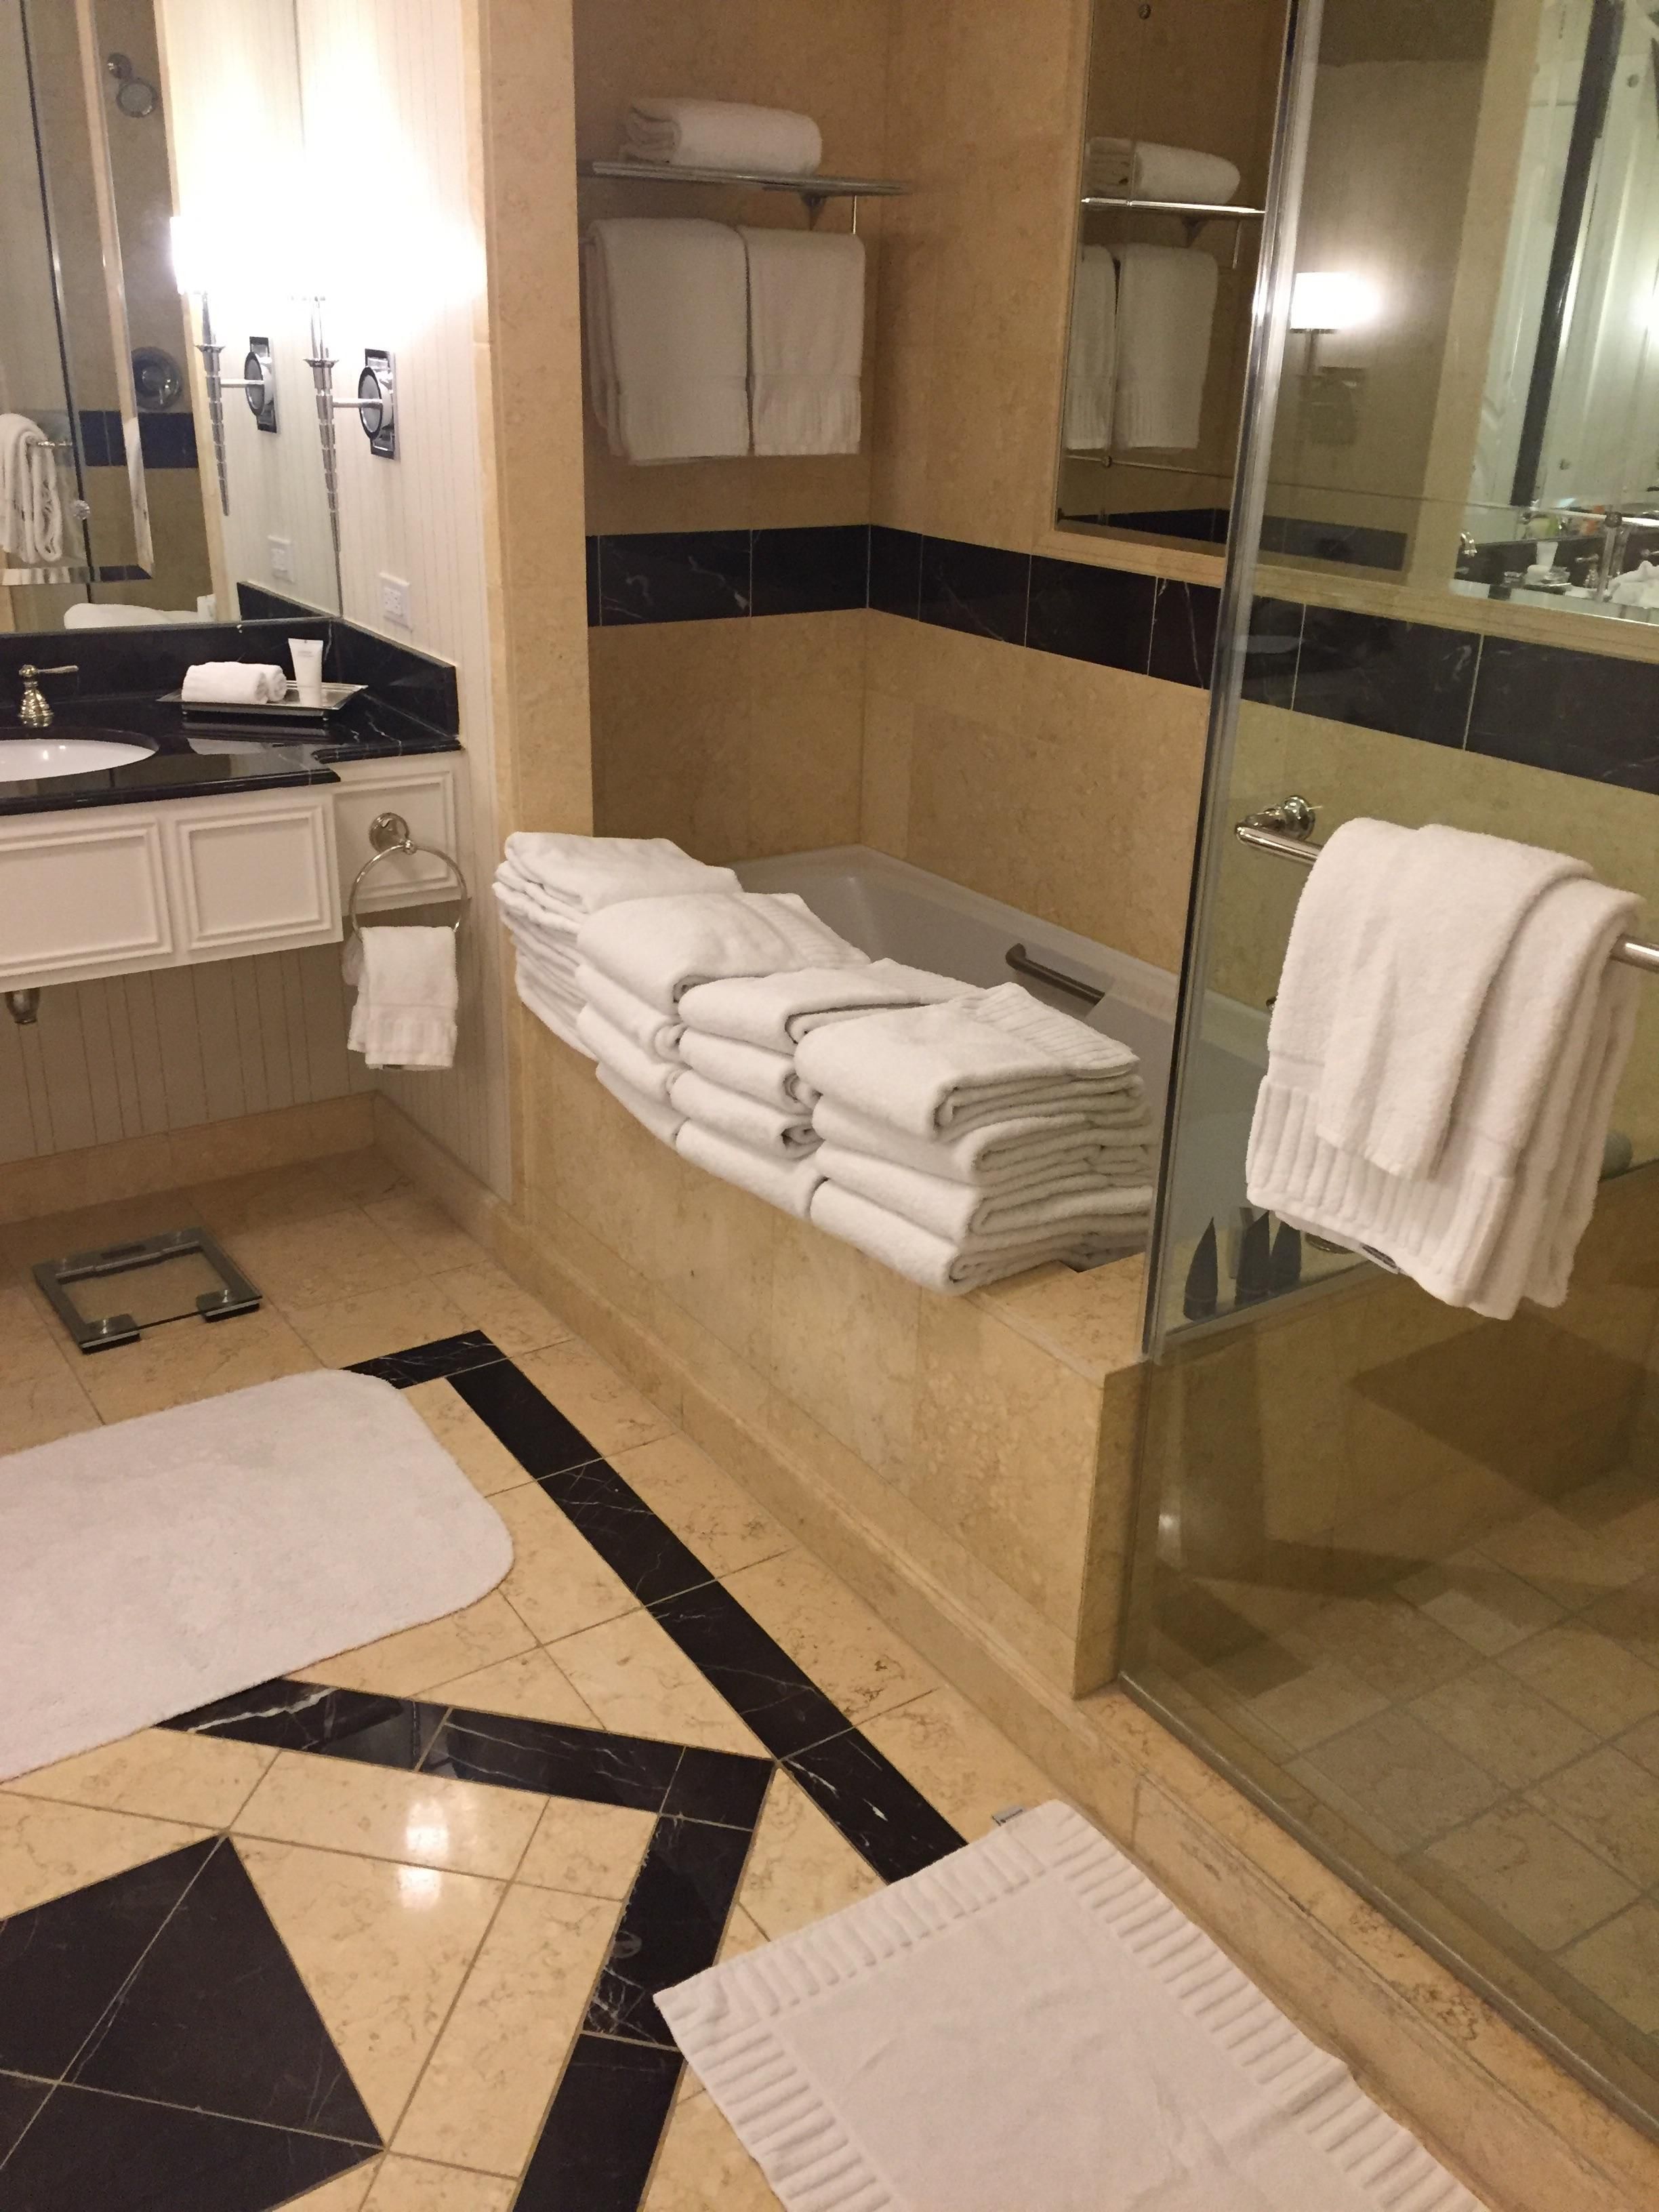 Last time I was in Las Vegas I ran out of towels. I told housekeeping that I would tip one dollar for every extra towel put in my room. #Pallazo